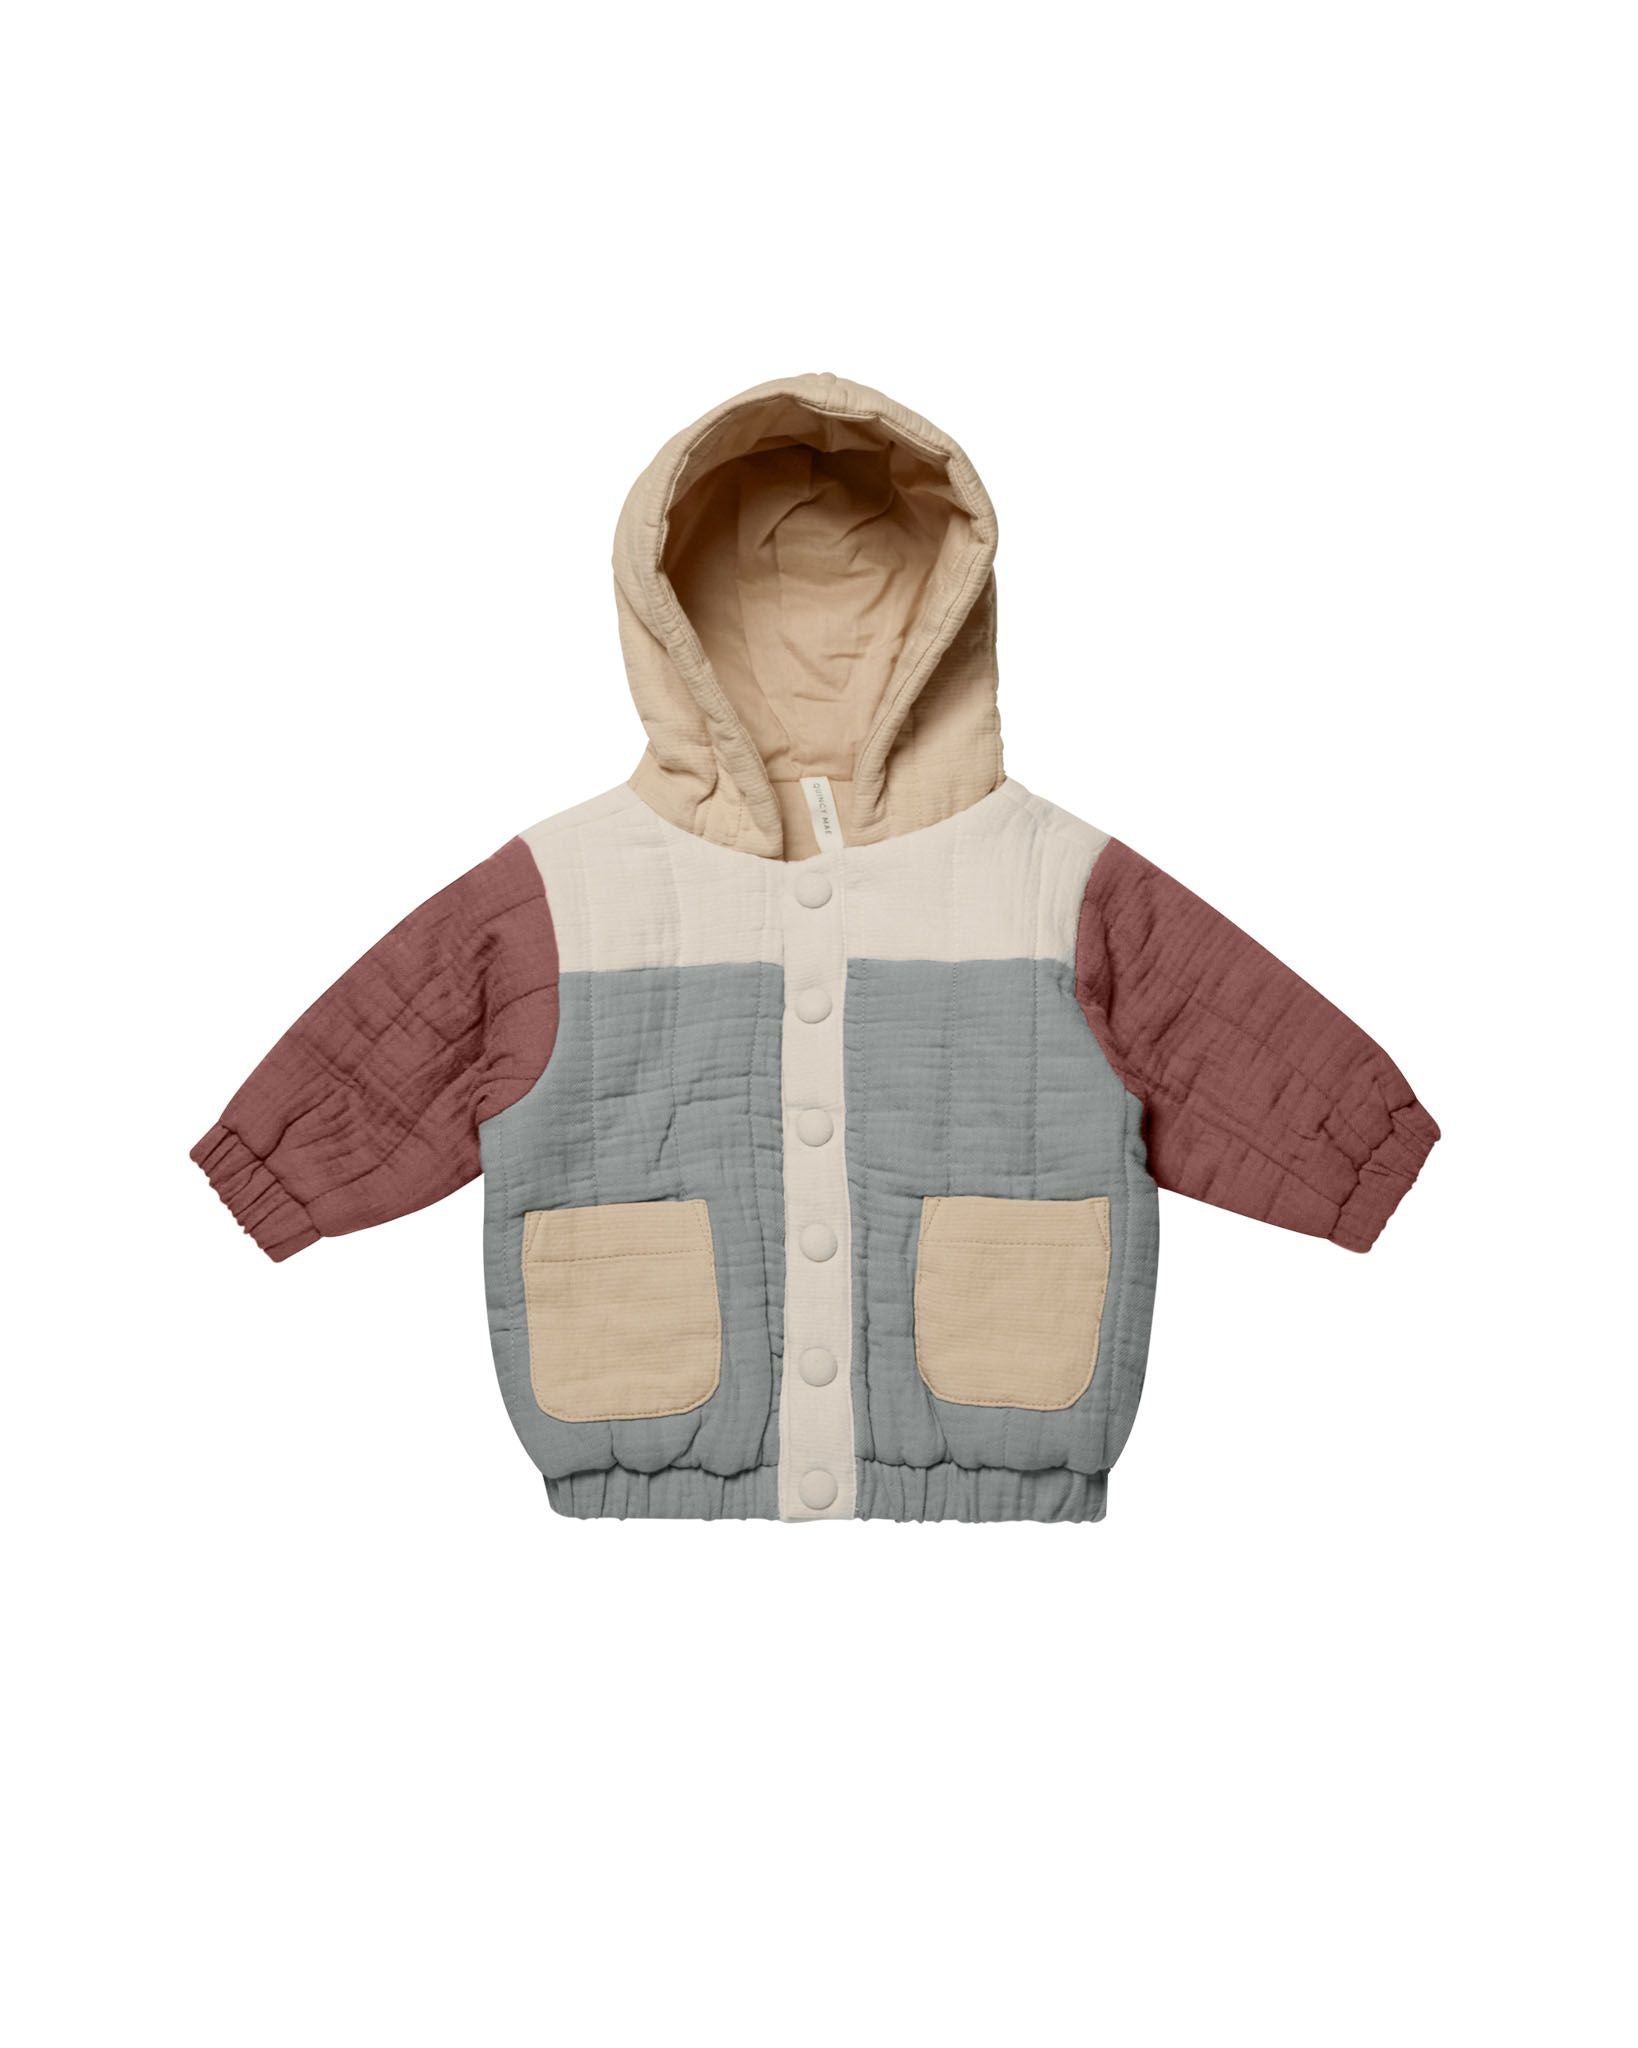 Hooded Woven Jacket - Color Block